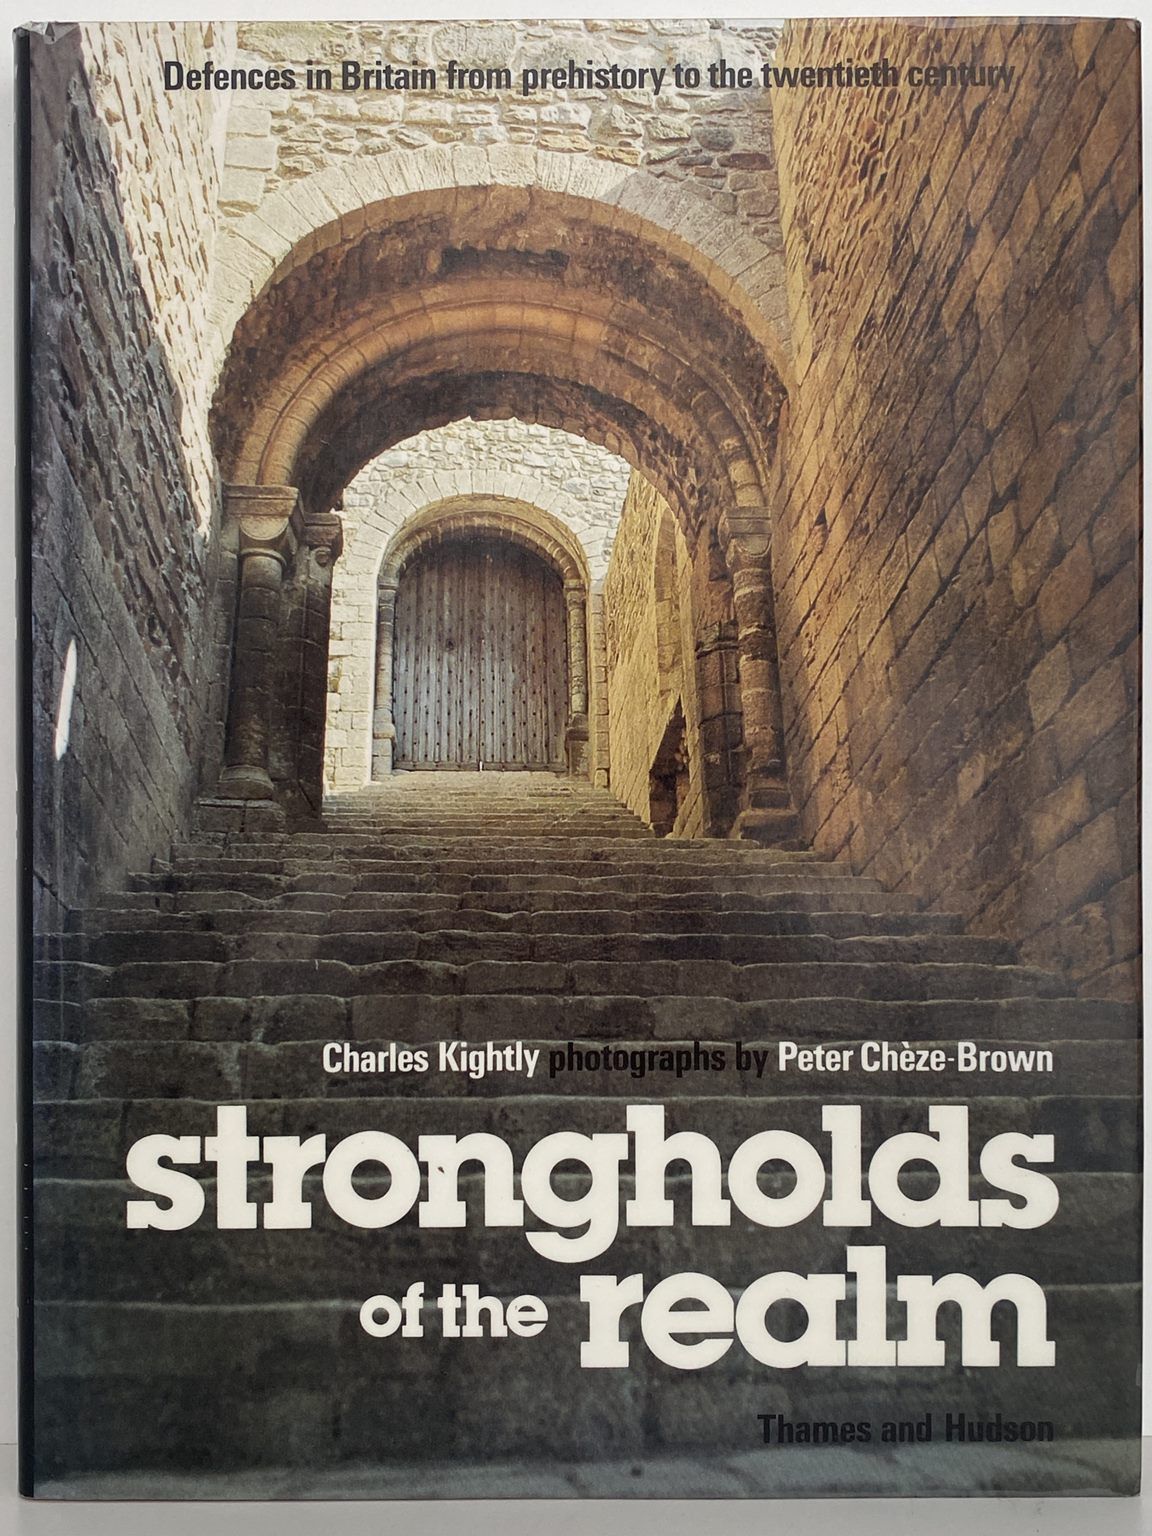 STRONGHOLDS of the REALM: Defences in Britain from Prehistory to 20th Century